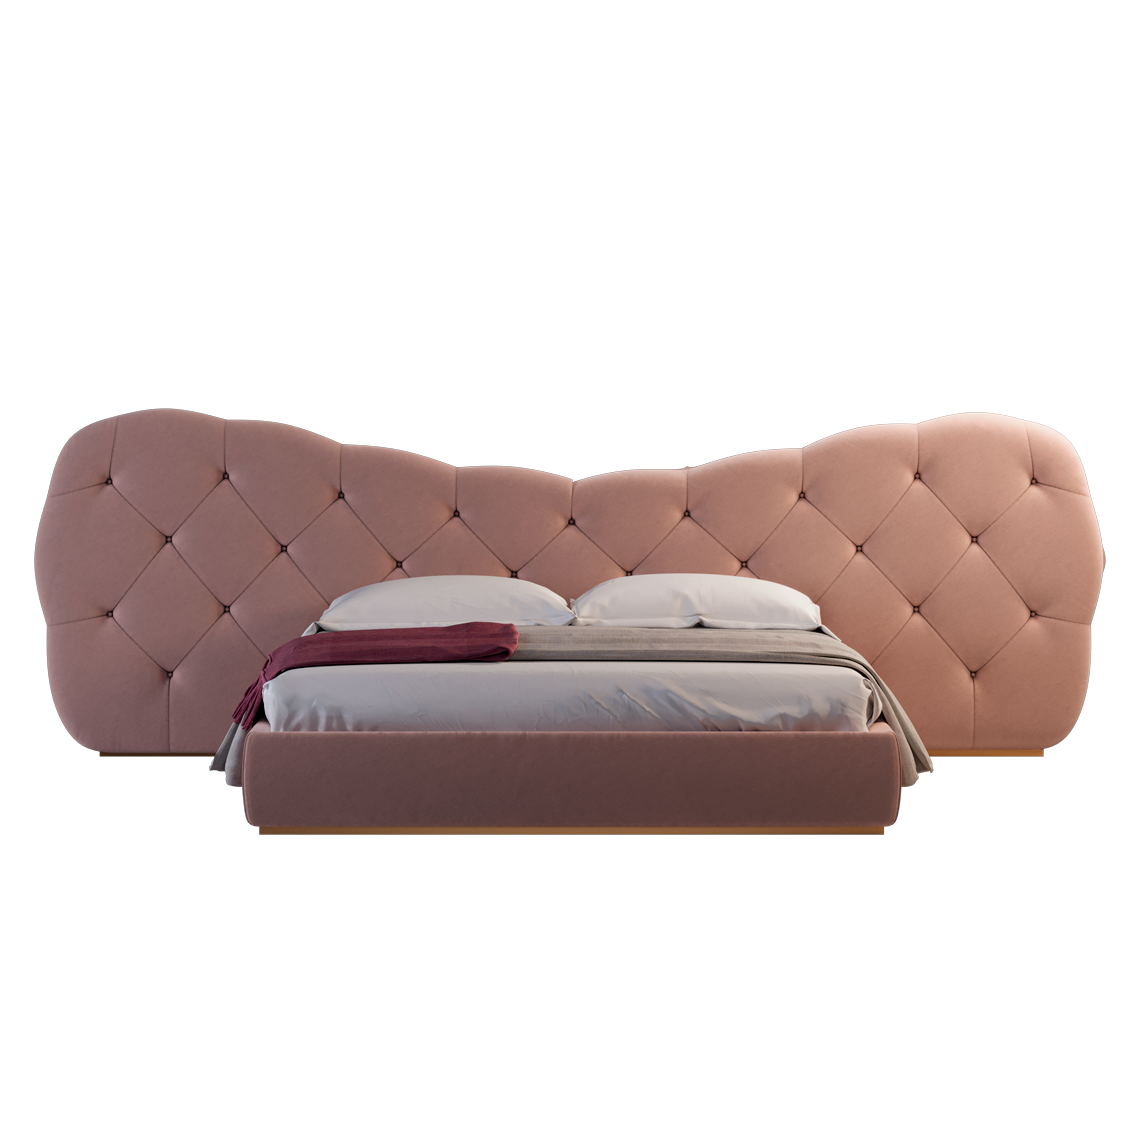 Upholstered Bed You'll Fall in Love With: Linda